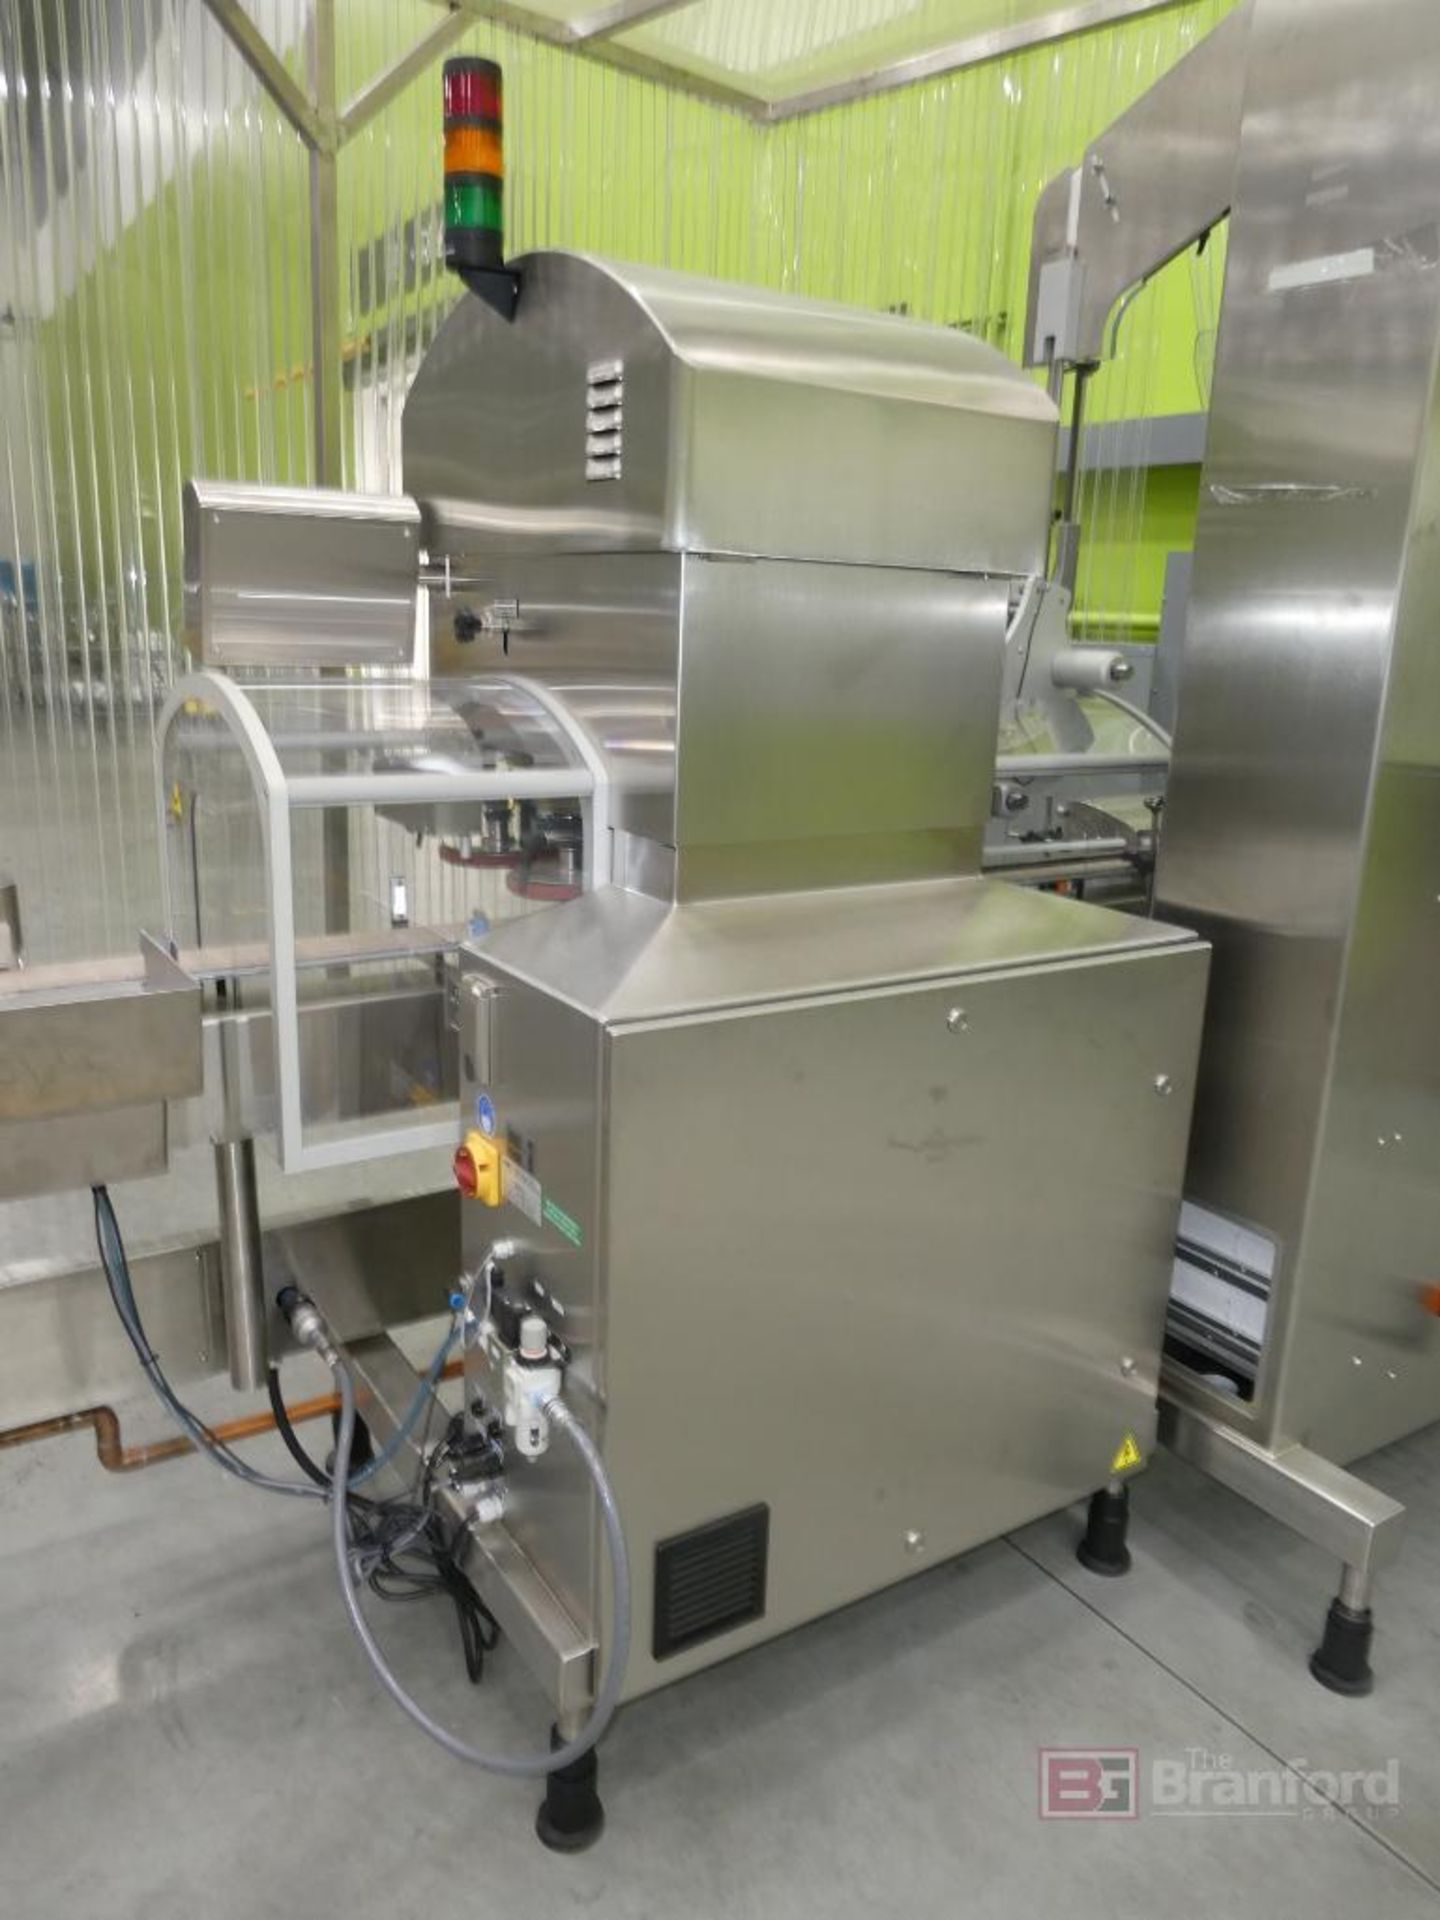 2021 NJM Packaging Model Beltorque BTIC, Stainless Steel Inline Capping Machine - Image 6 of 8